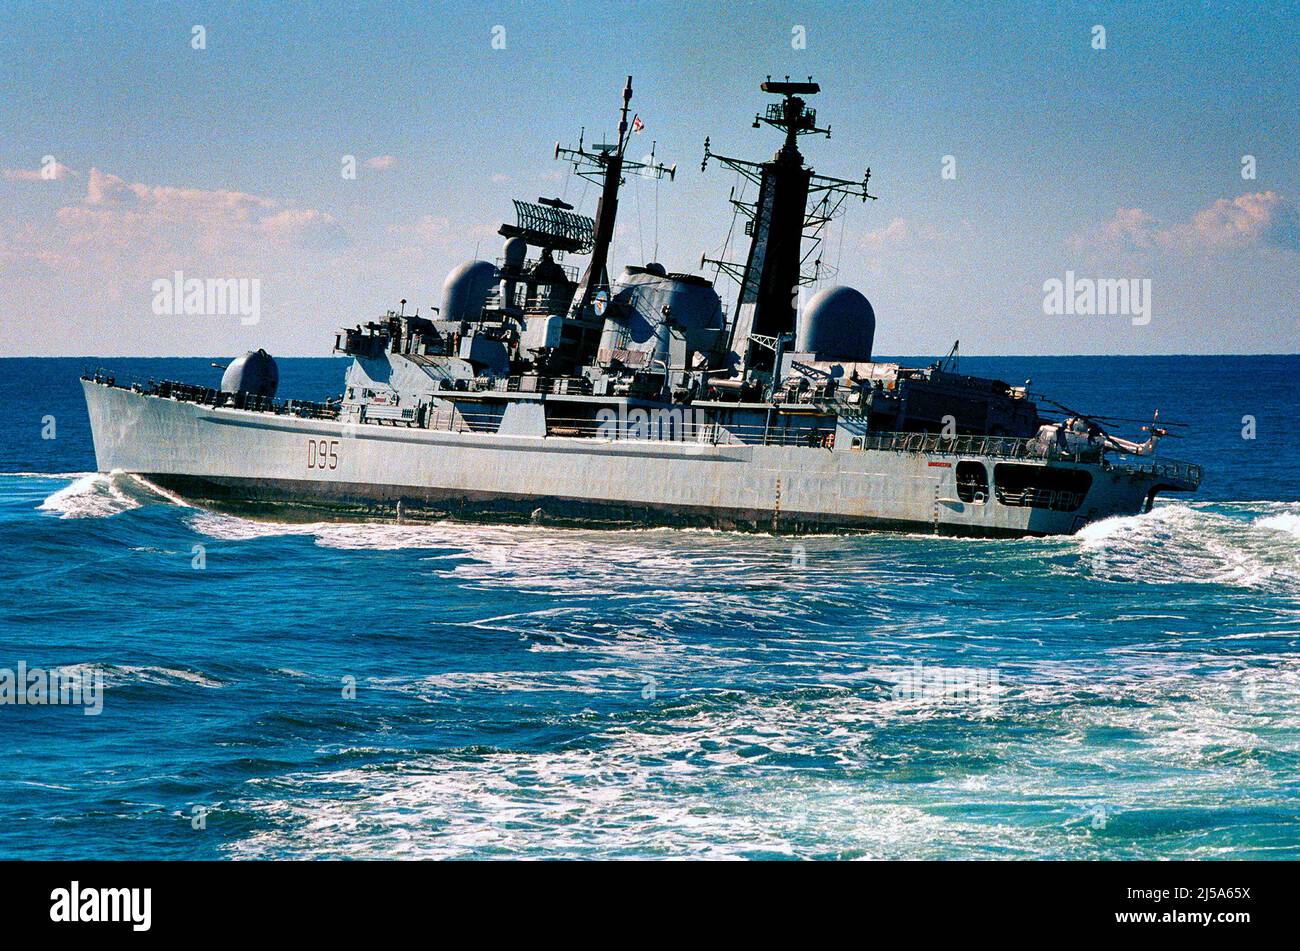 AJAXNETPHOTO. 5TH OCT 1999. AT SEA, CHANNEL. HIGH SPEED TURN - HMS MANCHESTER - DESTROYER PERFORMING A TIGHT TURN DURING STAFF COLLEGE SEA DAYS. PHOTO:JONATHAN EASTLAND/AJAX REF:5441602 4 Stock Photo